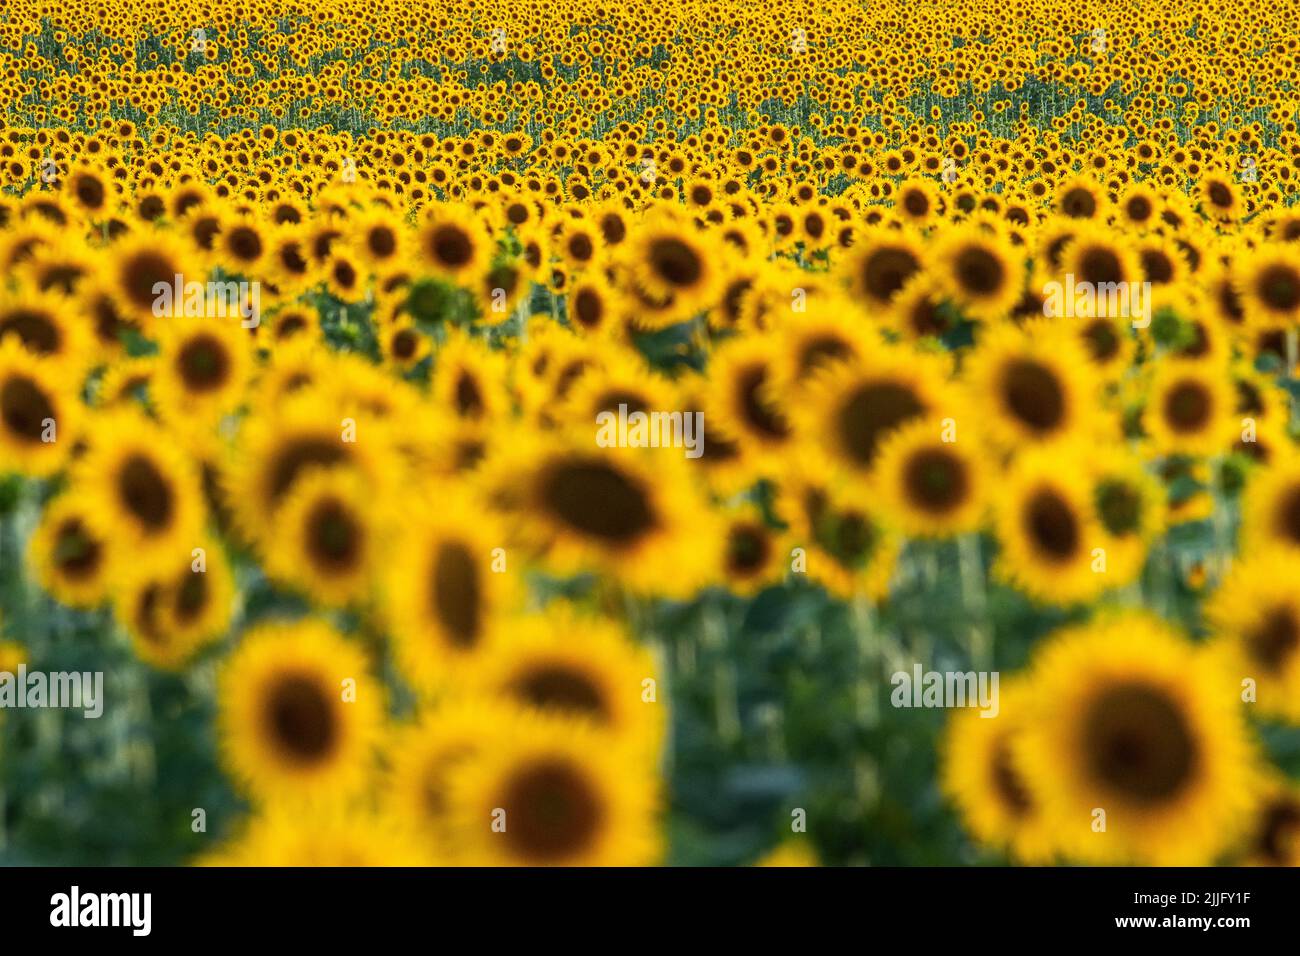 Sunflowers growing in a filed during a summer day. Stock Photo